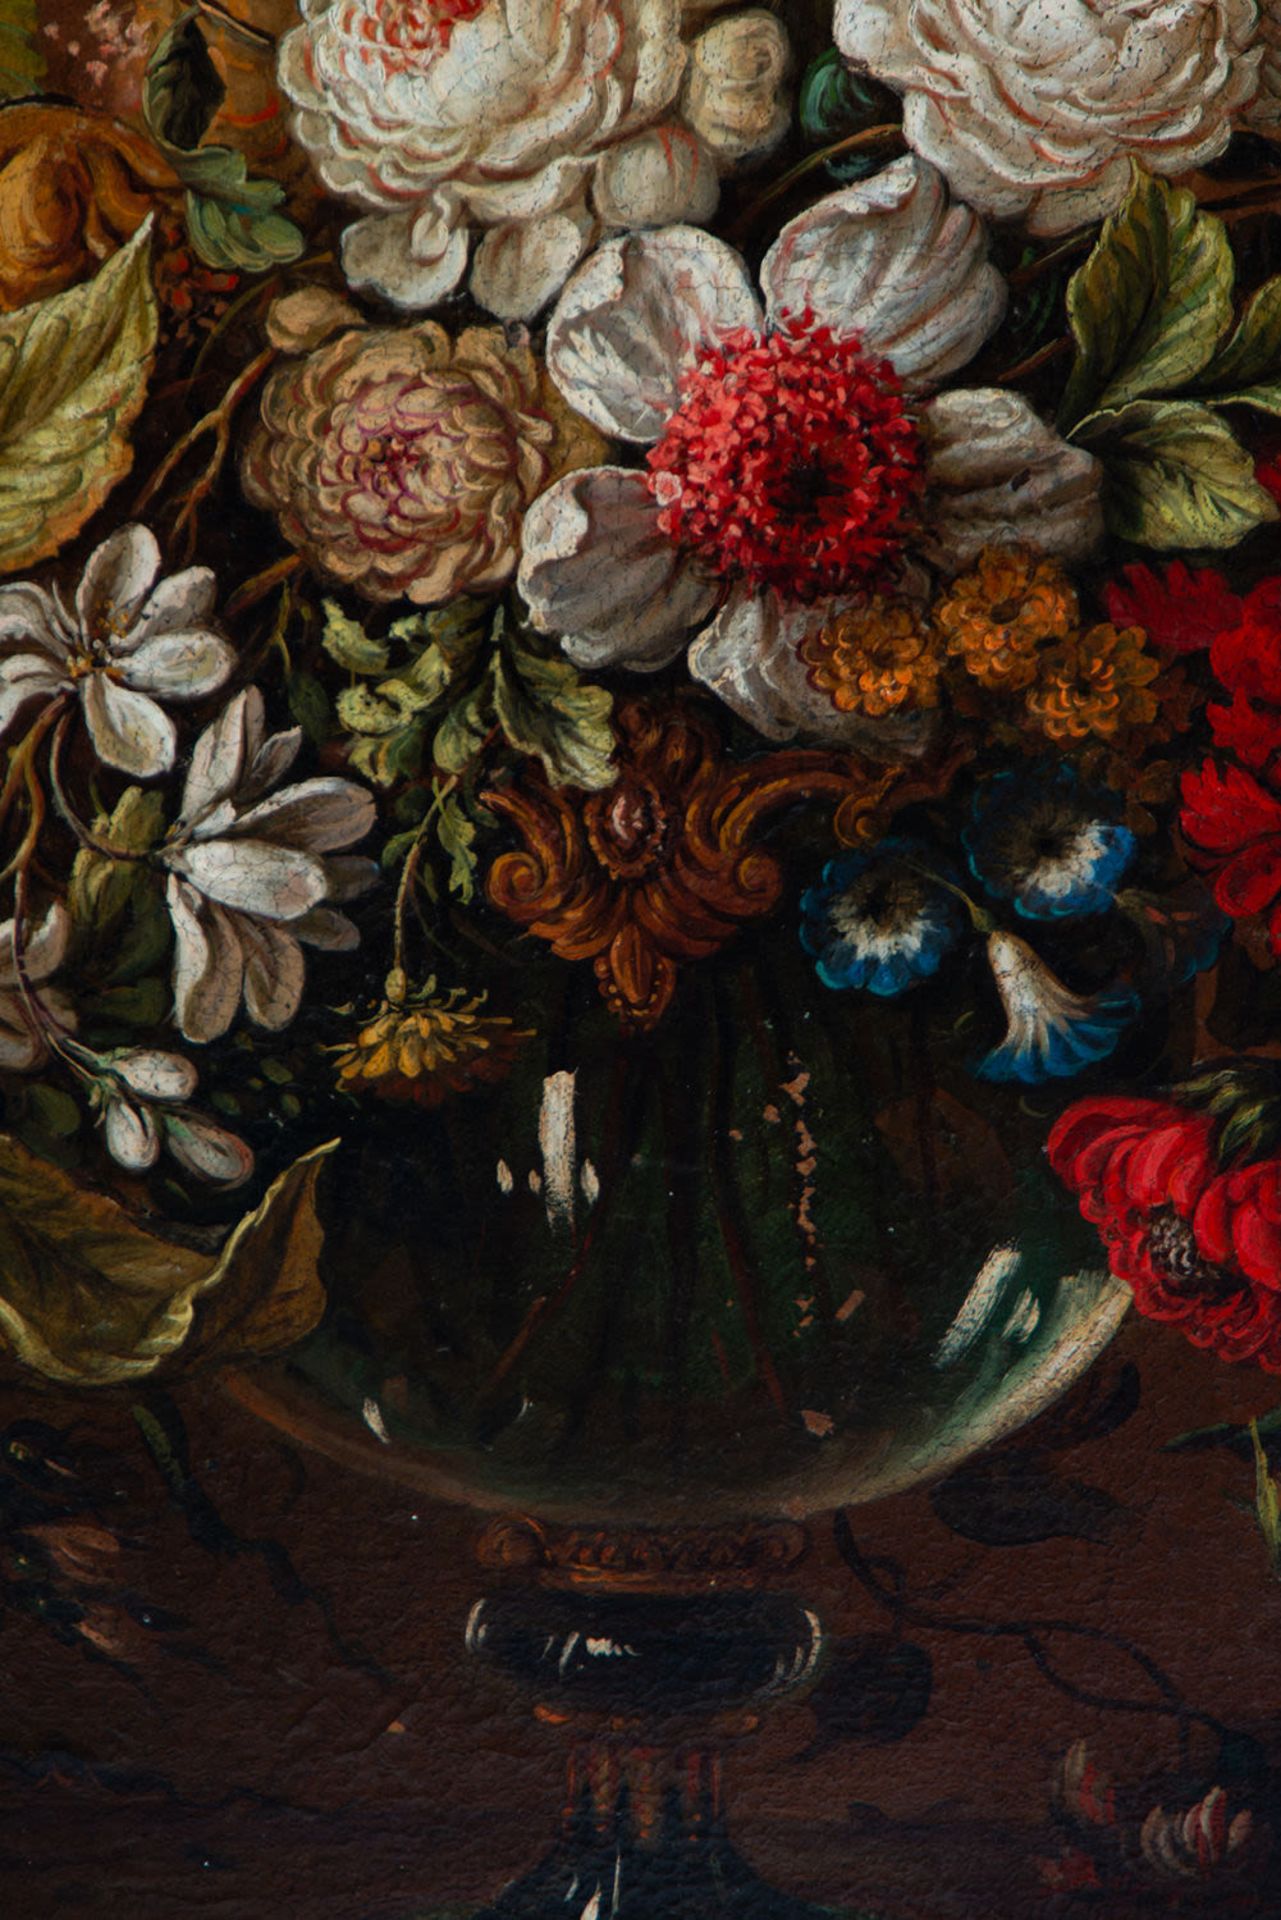 Pair of large still lifes of Flowers, Dutch school of the 17th - 18th century - Image 10 of 20